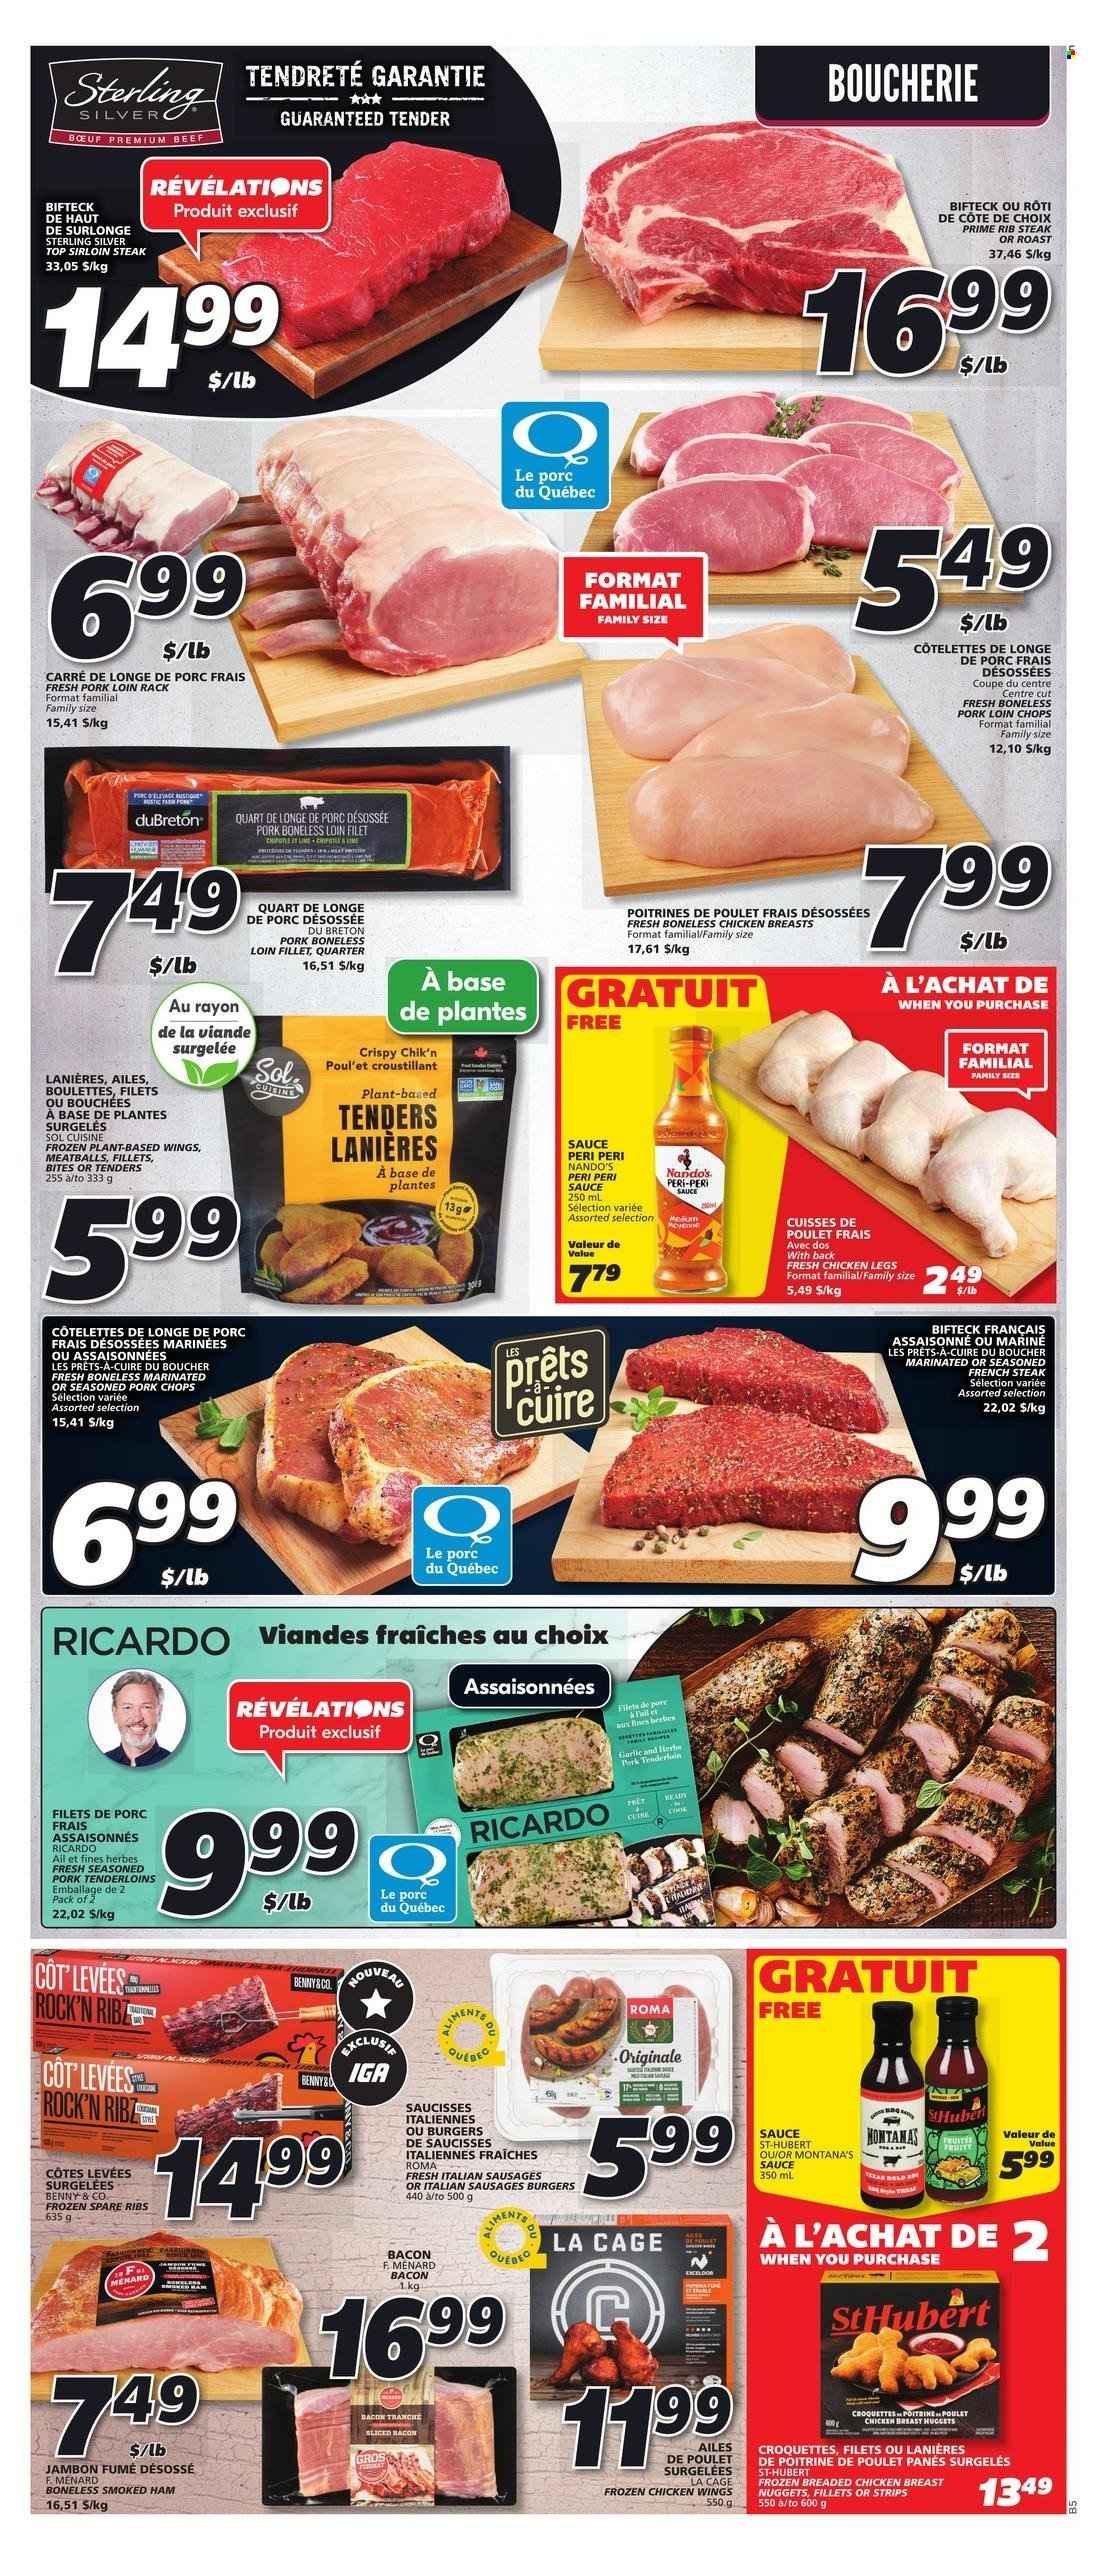 thumbnail - IGA Flyer - March 16, 2023 - March 22, 2023 - Sales products - garlic, meatballs, nuggets, hamburger, sauce, fried chicken, chicken nuggets, roast, bacon, ham, smoked ham, sausage, chicken wings, strips, potato croquettes, peri peri sauce, Sol, chicken breasts, chicken legs, chicken, beef sirloin, steak, sirloin steak, ribs, pork chops, pork loin, pork meat, pork tenderloin, pork spare ribs, marinated pork. Page 8.